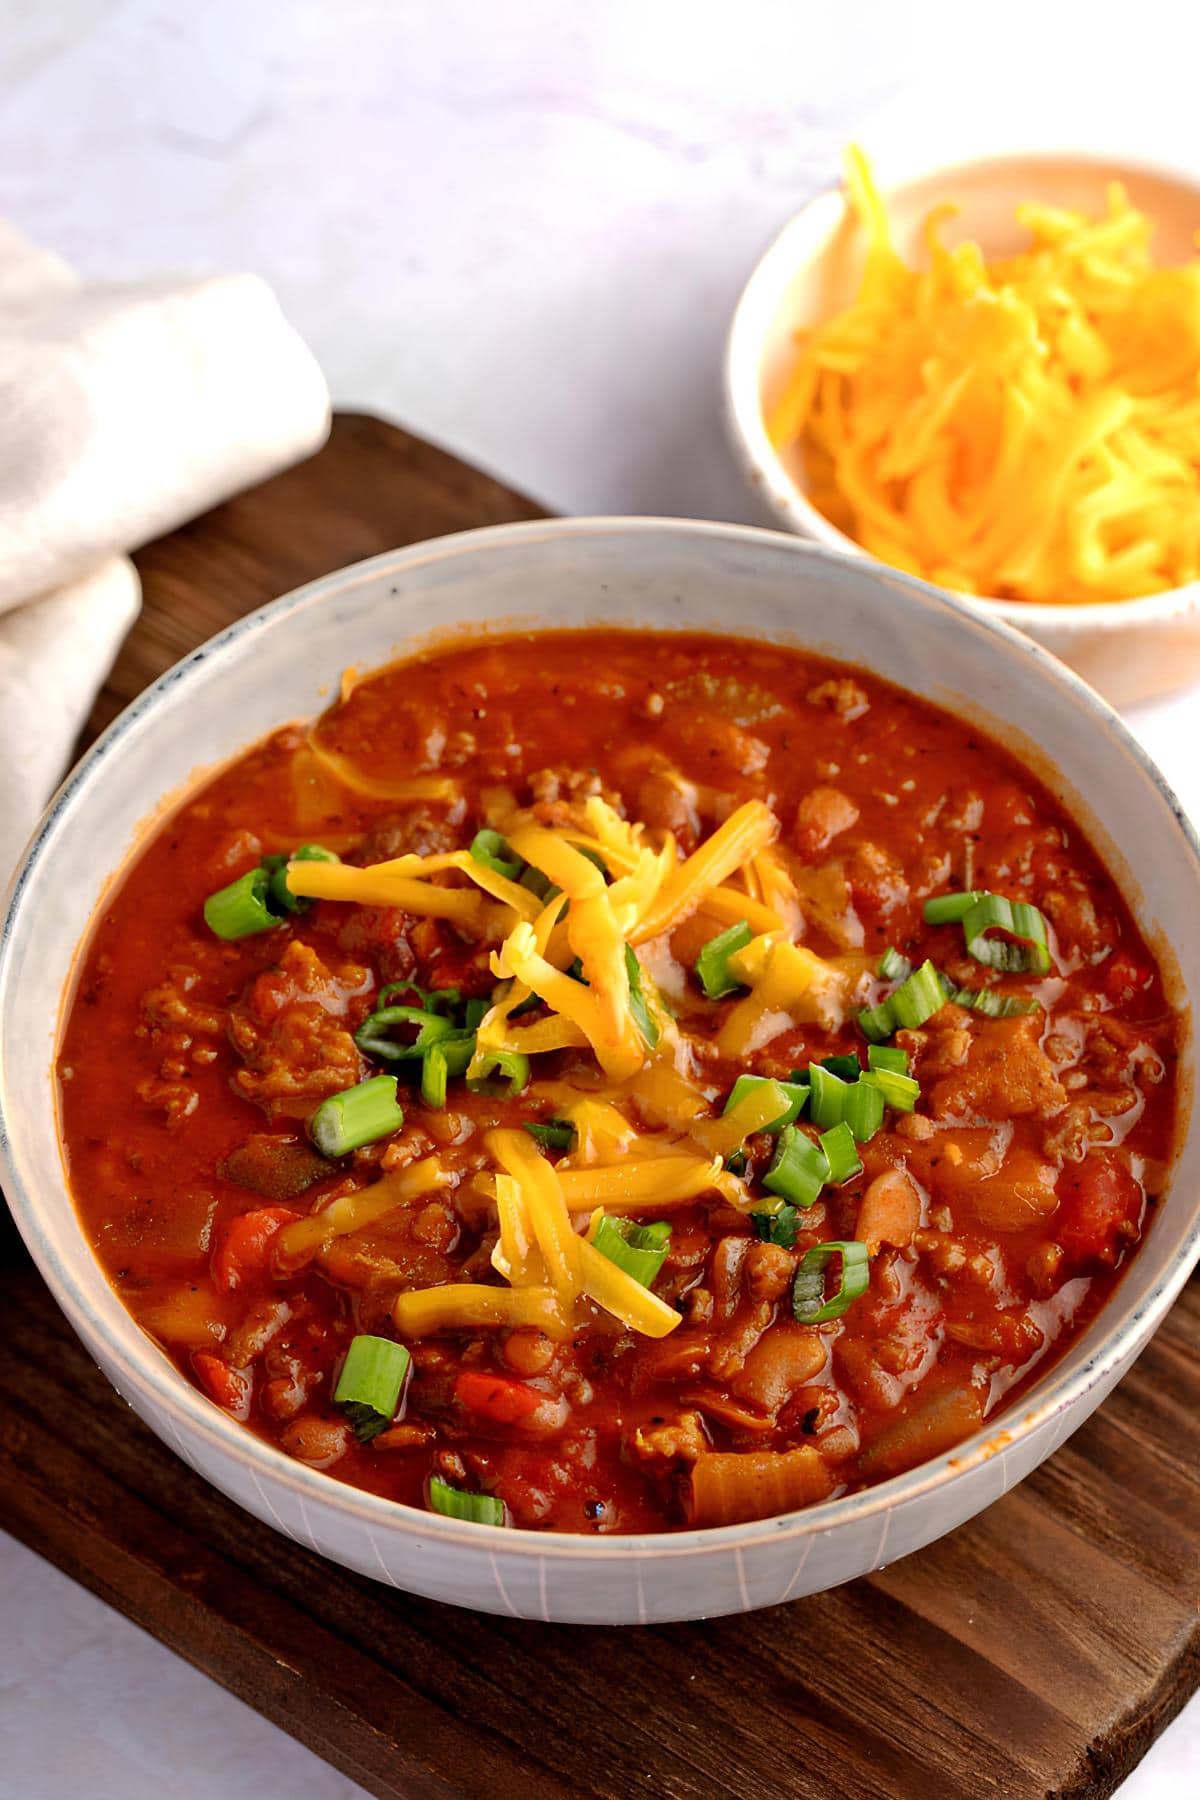 Boilmaker chili with ground beef and sausage topped with cheese and green onions